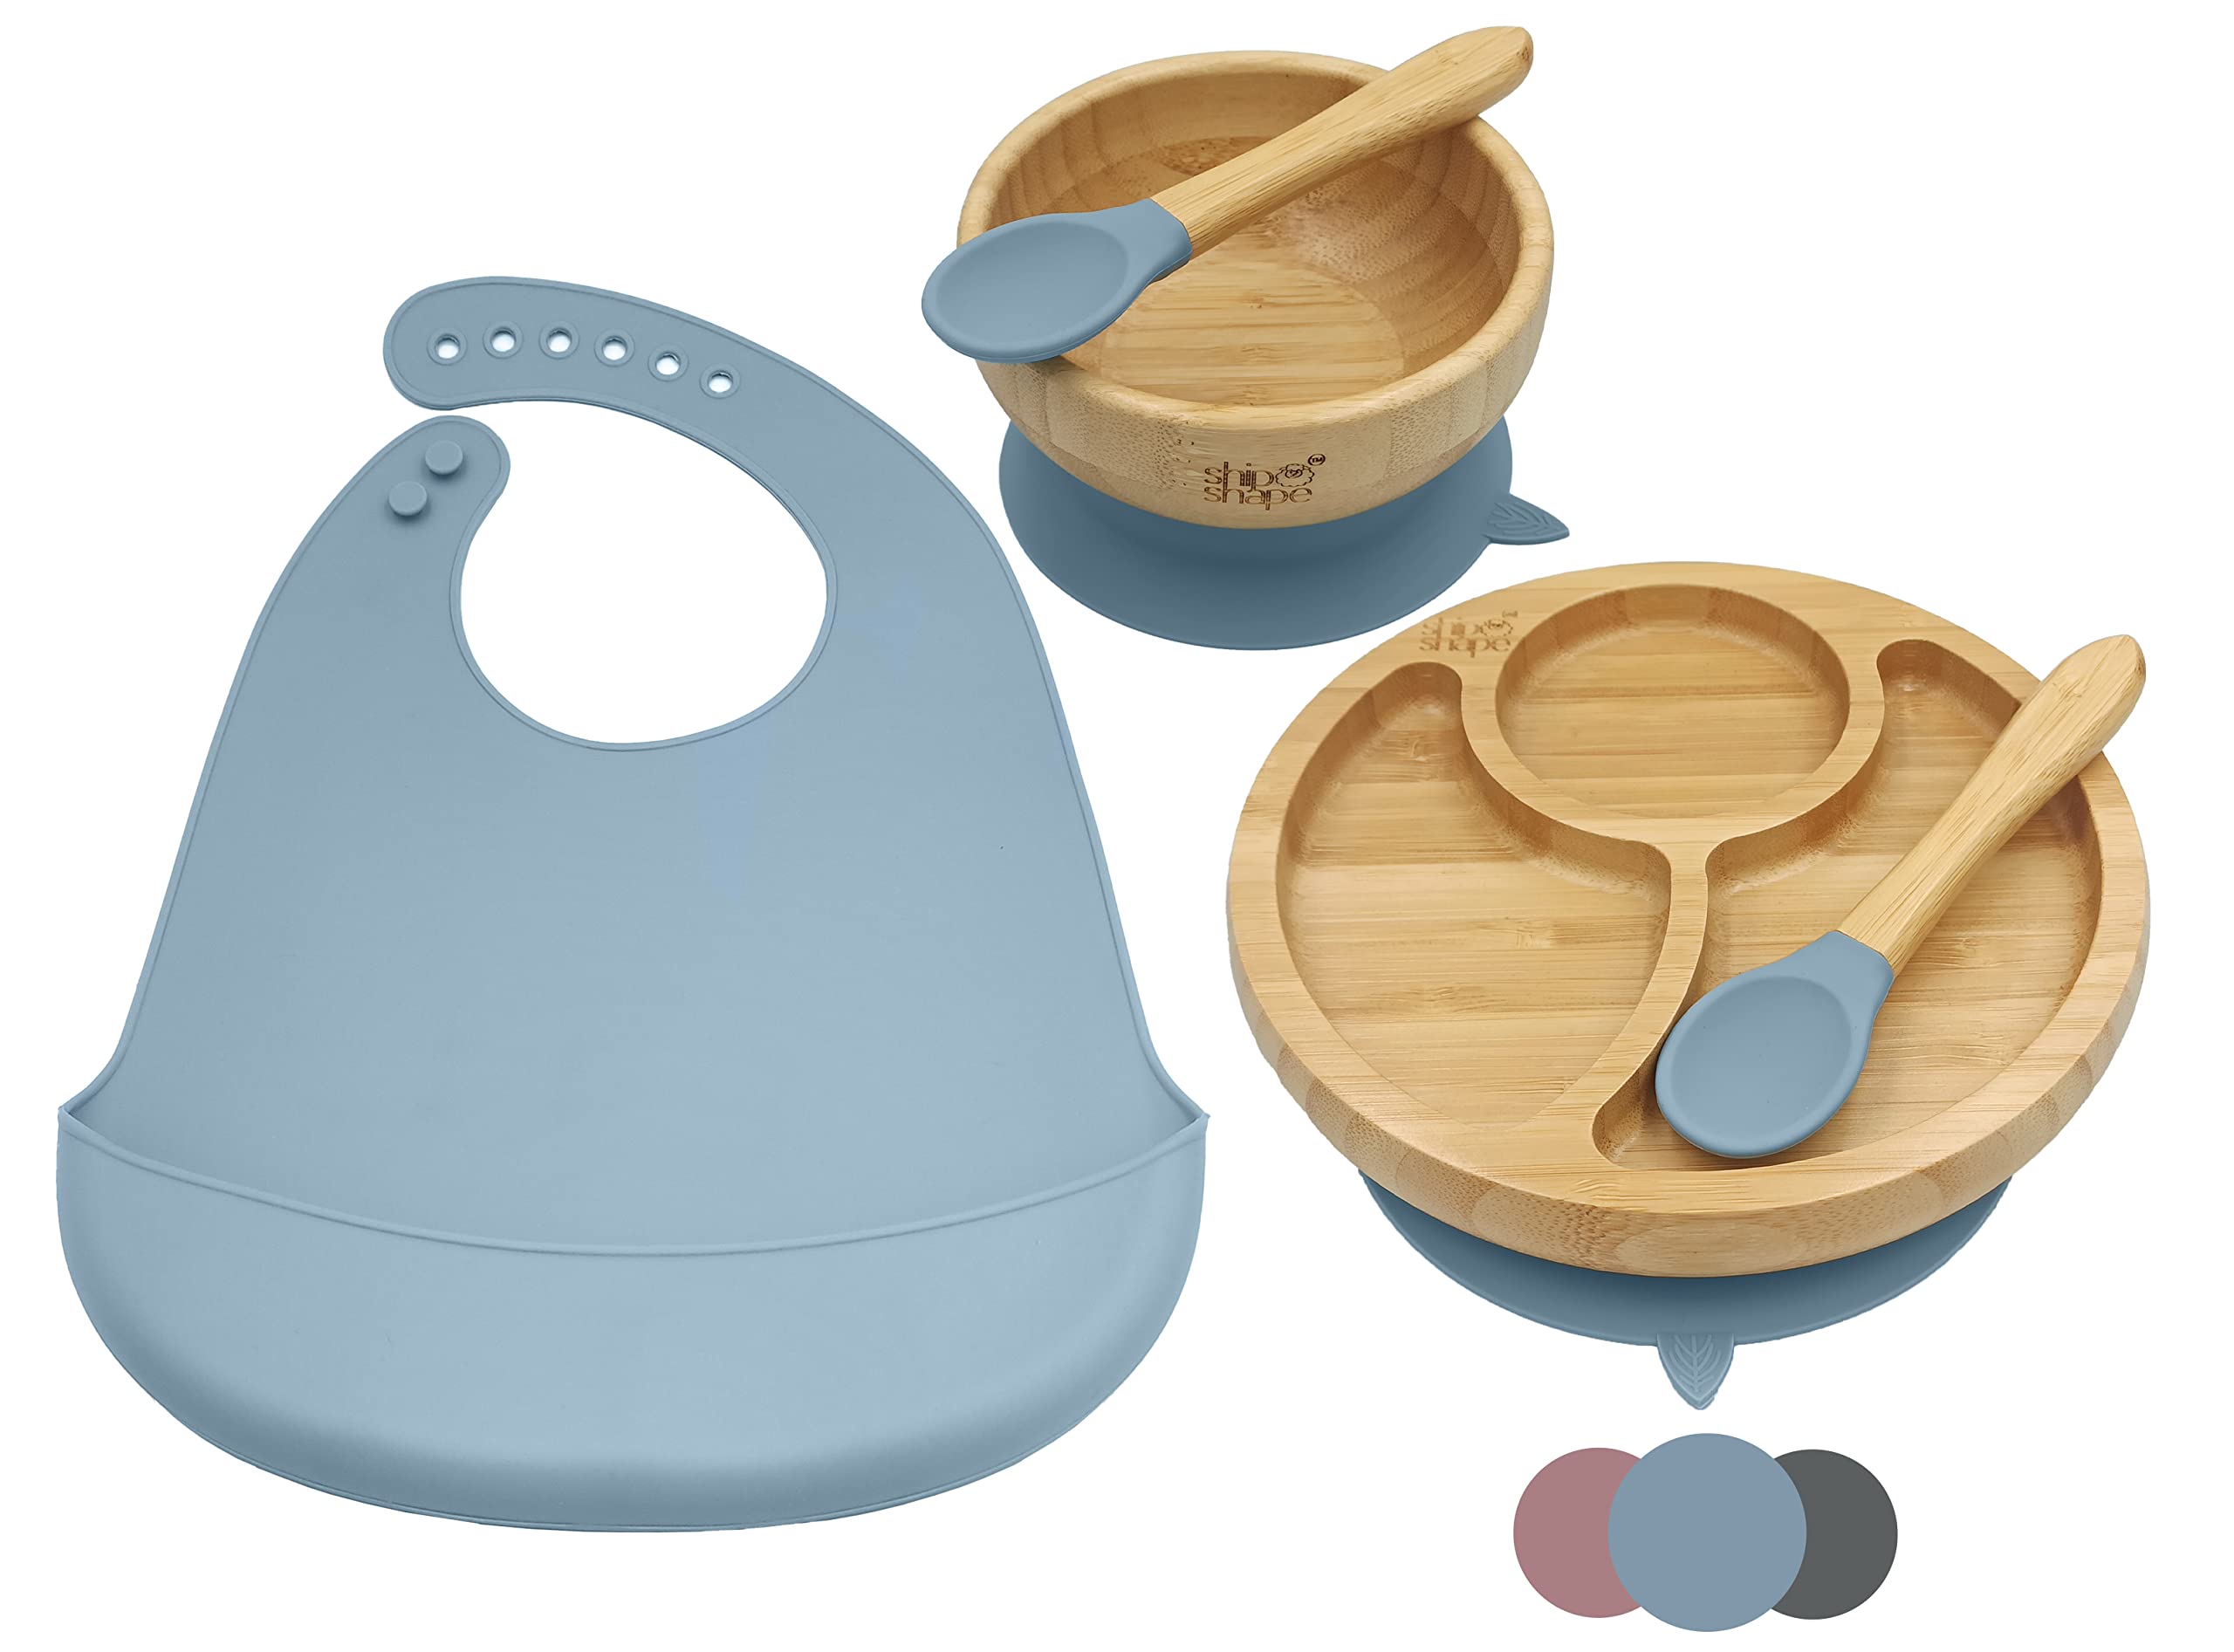 ShipShape Bamboo Baby Weaning Set, Suction Plate & Bowl, 2 Spoons & Silicone Bib, Baby Feeding Set, Free eBook on Weaning, Natural Wooden Plates, Perfect for Dinner Set & Baby Shower Gifts (Blue)